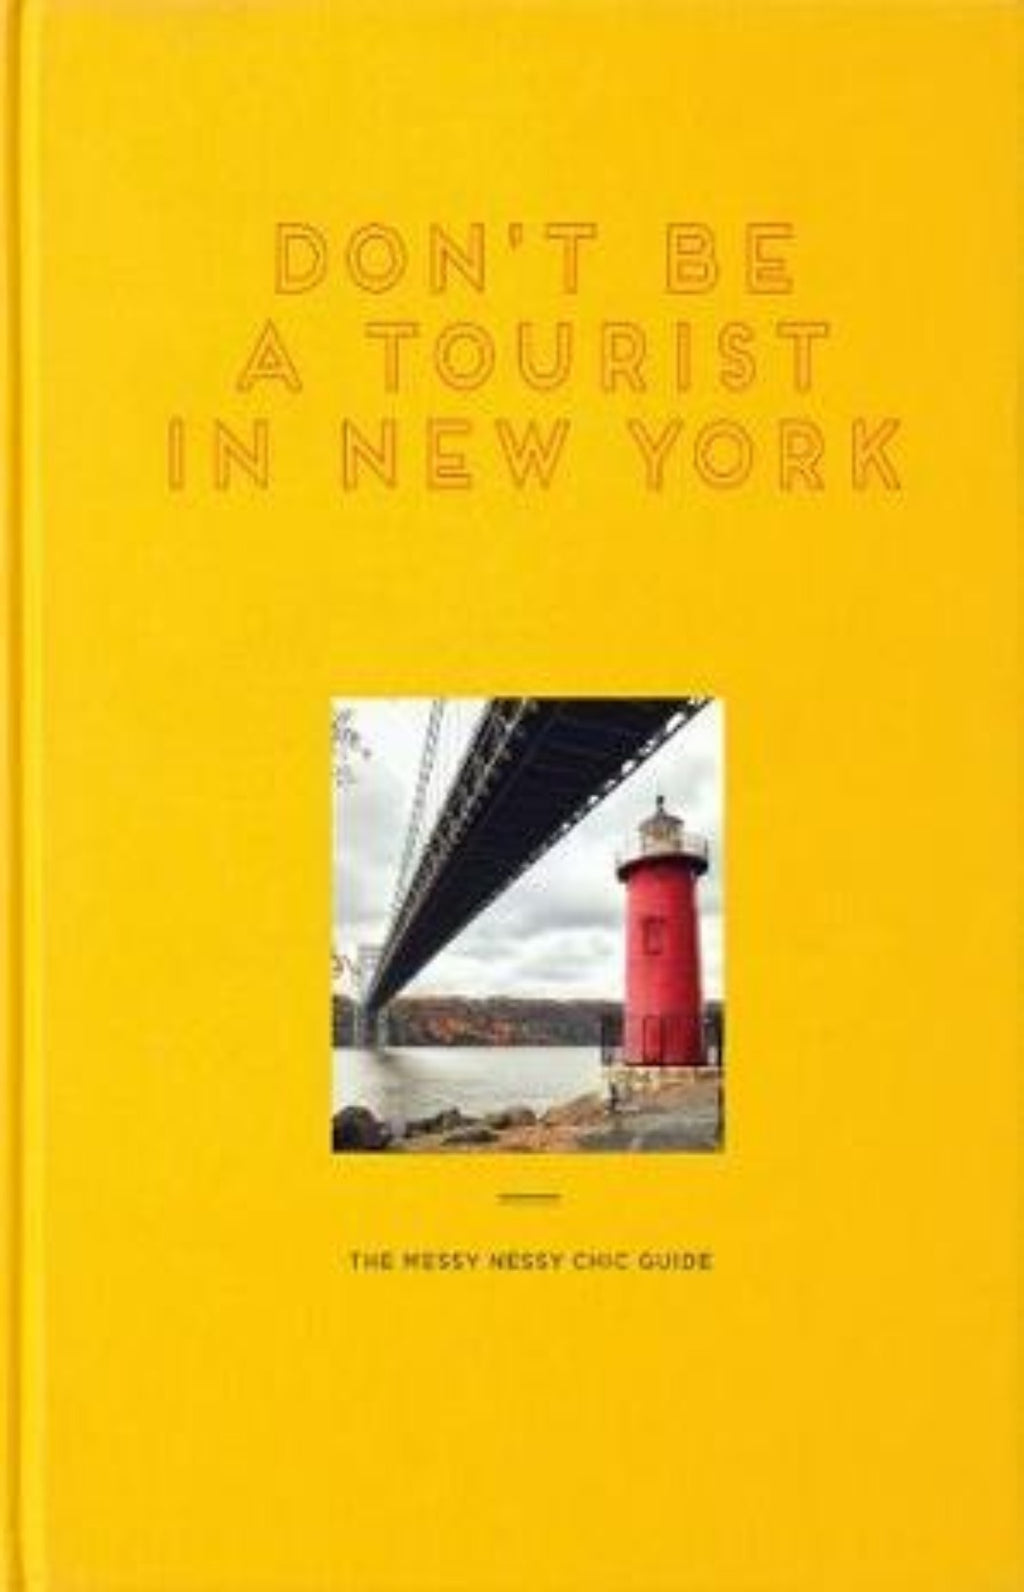 Don't Be a Tourist in New York : The Messy Nessy Chic Guide